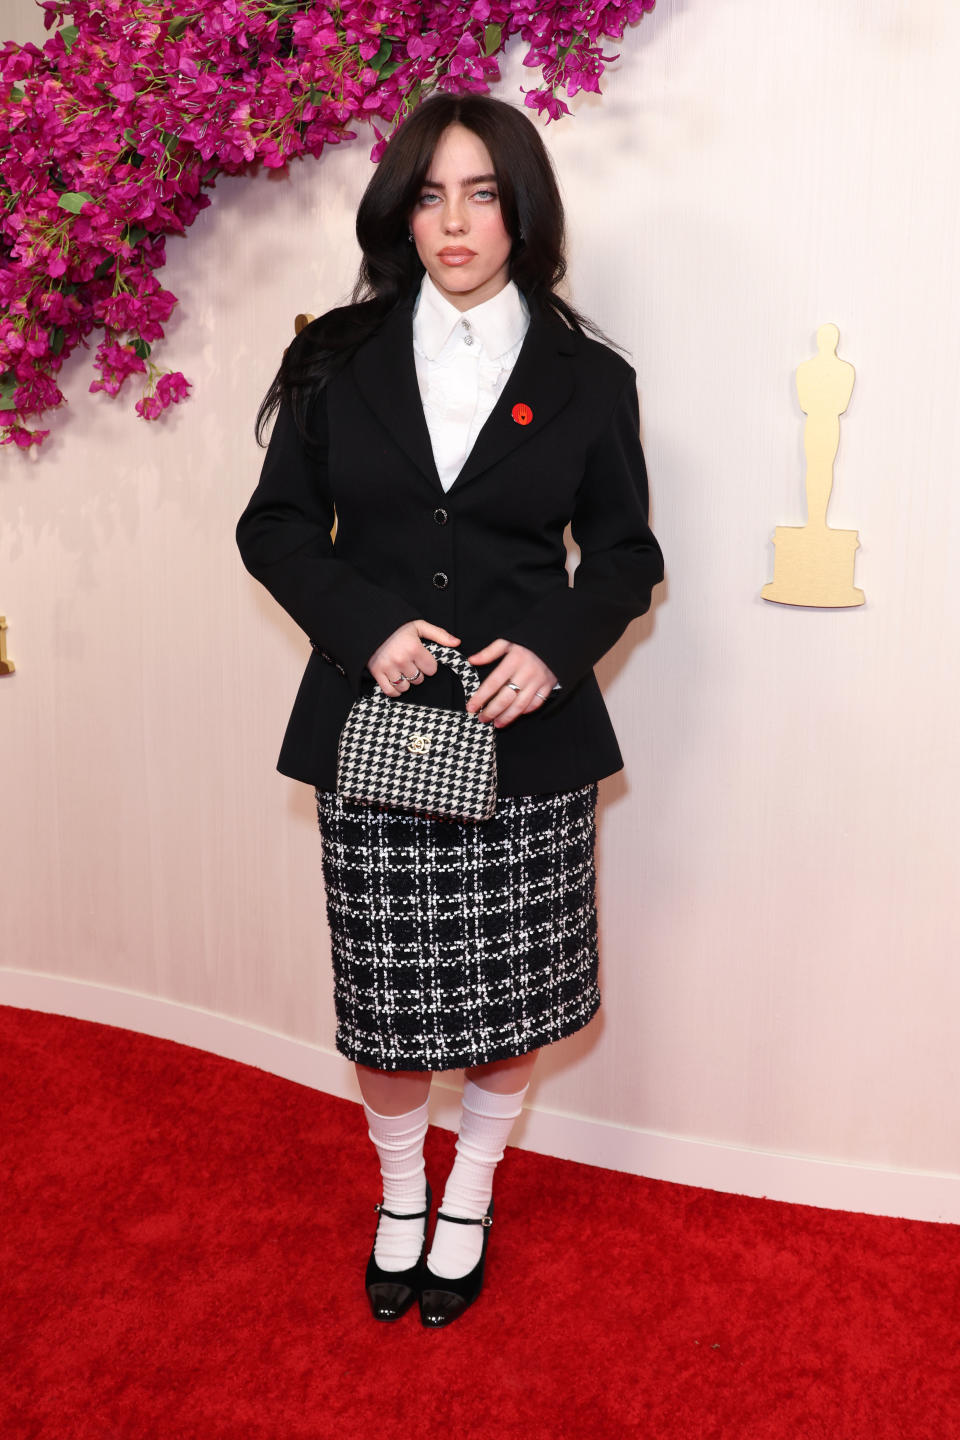 HOLLYWOOD, CALIFORNIA - MARCH 10: Billie Eilish attends the 96th Annual Academy Awards on March 10, 2024 in Hollywood, California. (Photo by JC Olivera/Getty Images)